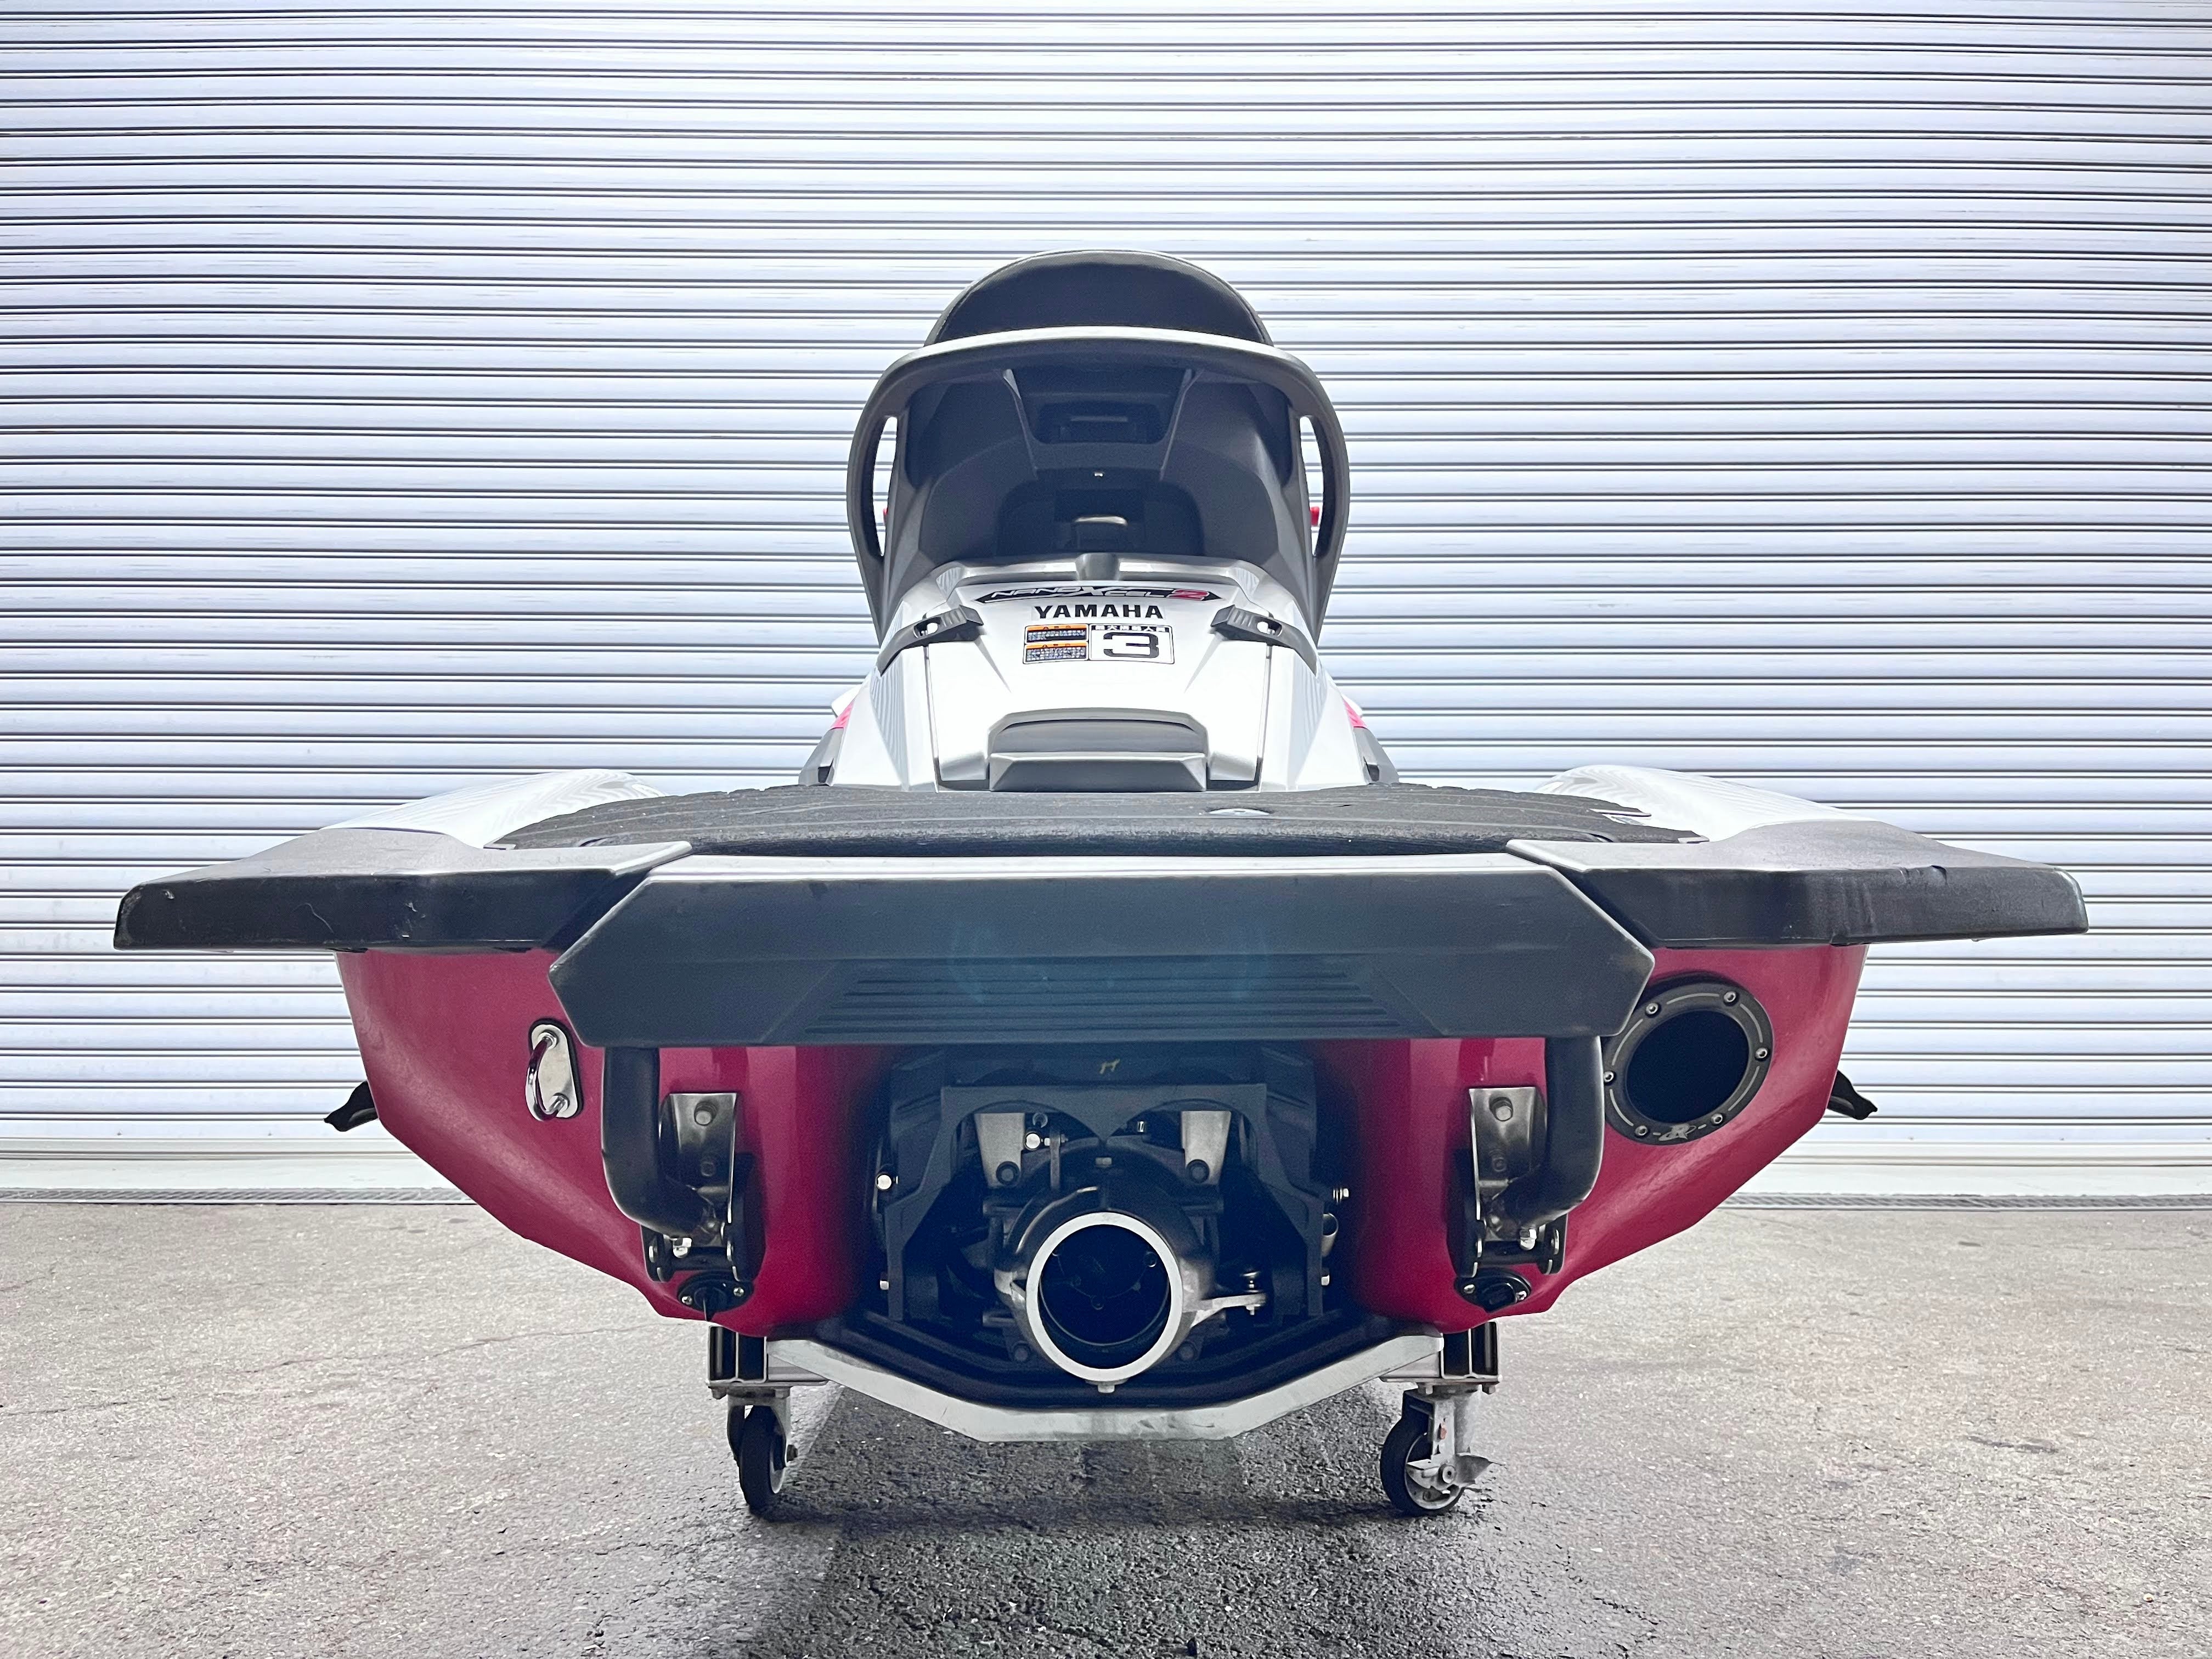 FX-Cruiser SVHO '20 174Hours 1800cc [with Audio & RIVA Exhaust][Almost fresh water only use]